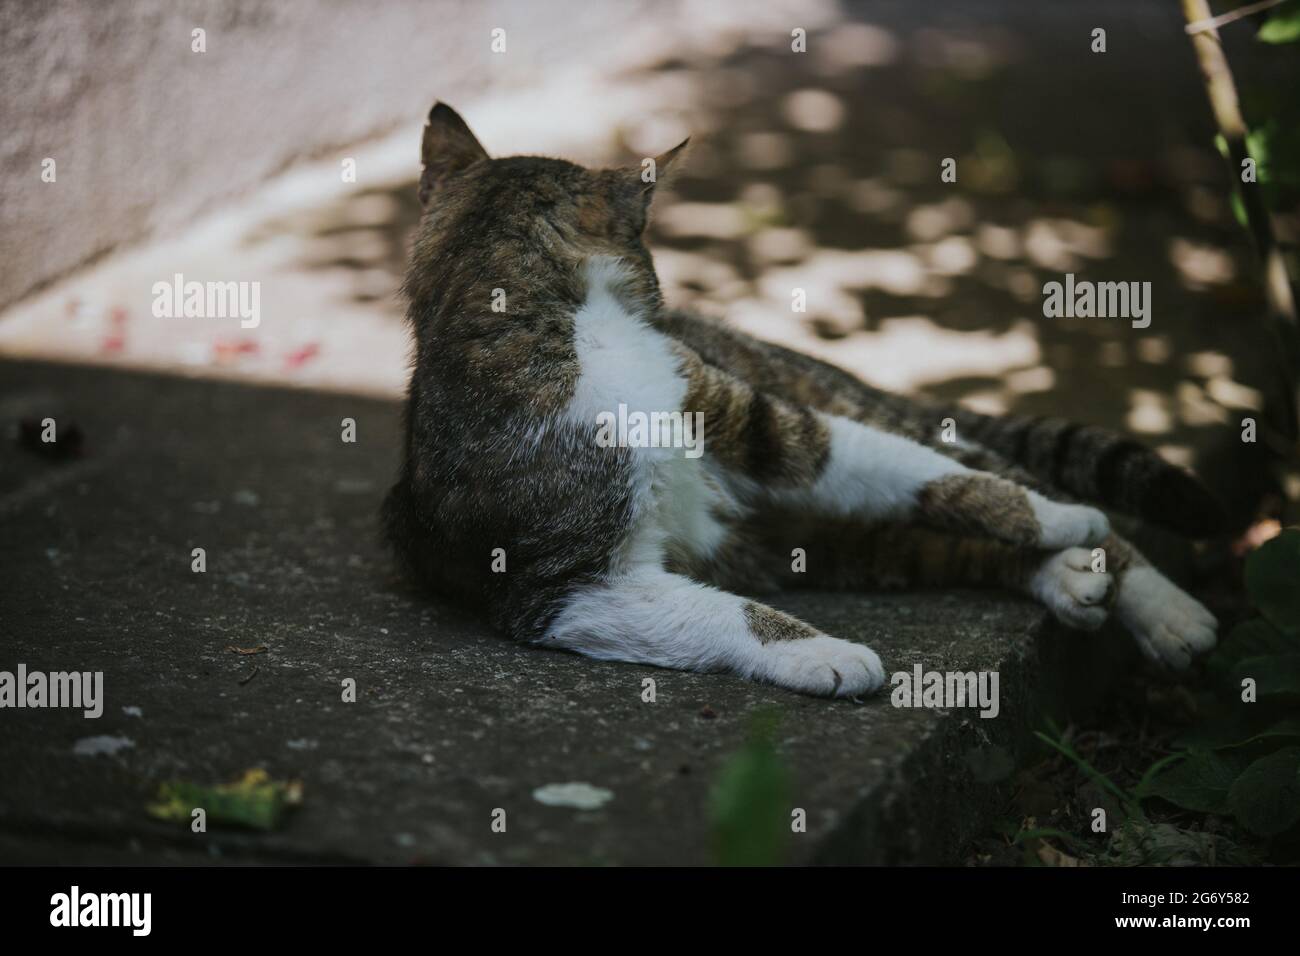 Closeup of the fluffy adorable striped cat laying on the ground and cleaning itself Stock Photo